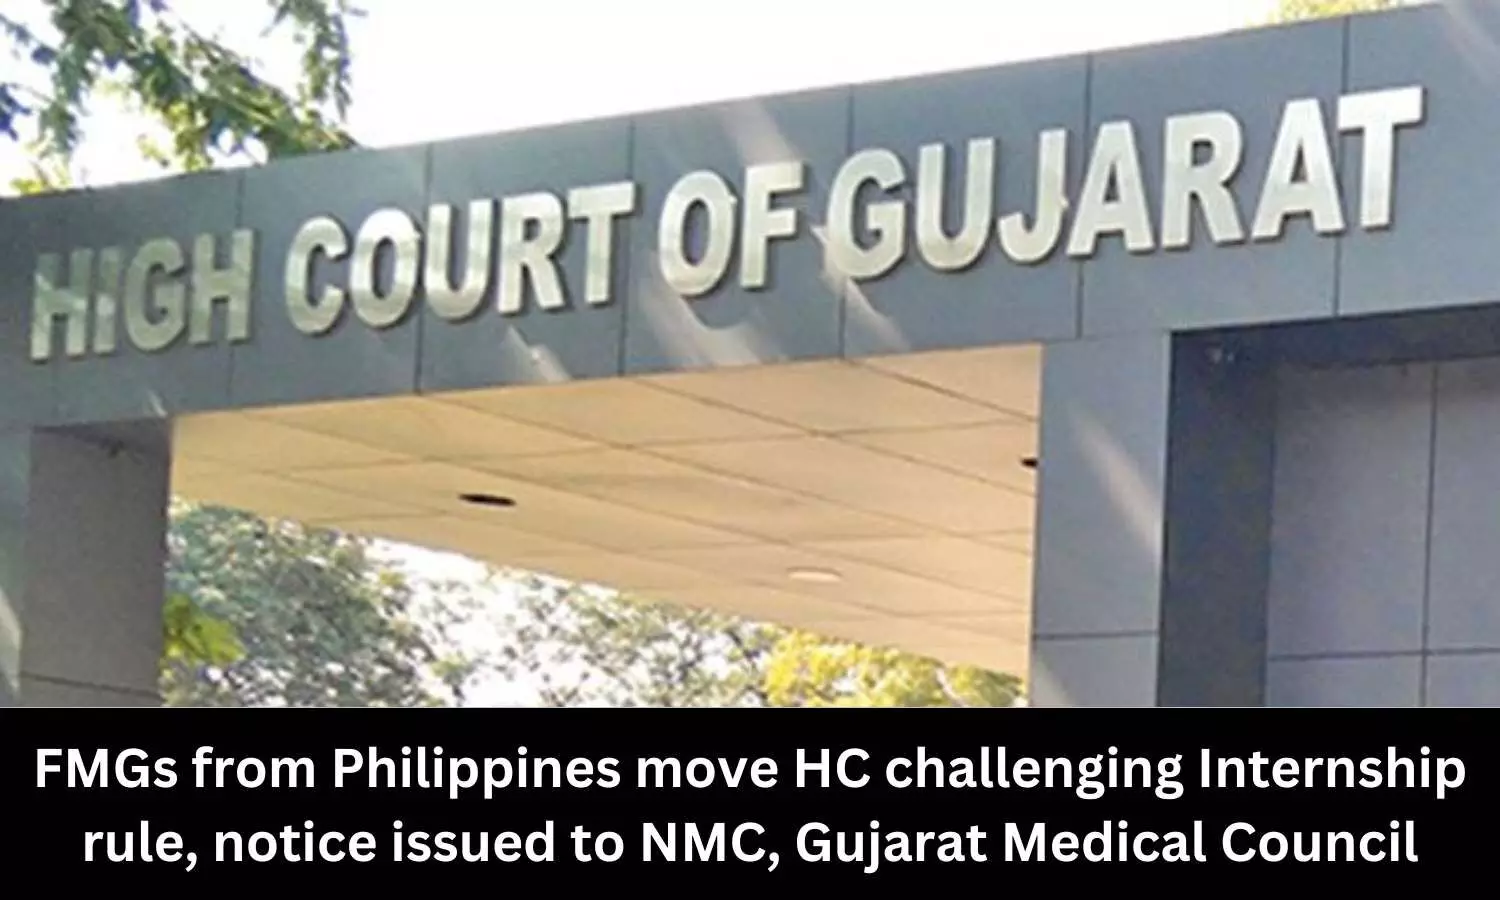 FMGs from Philippines move High Court challenging Internship rule, notice issued to NMC, Gujarat Medical Council